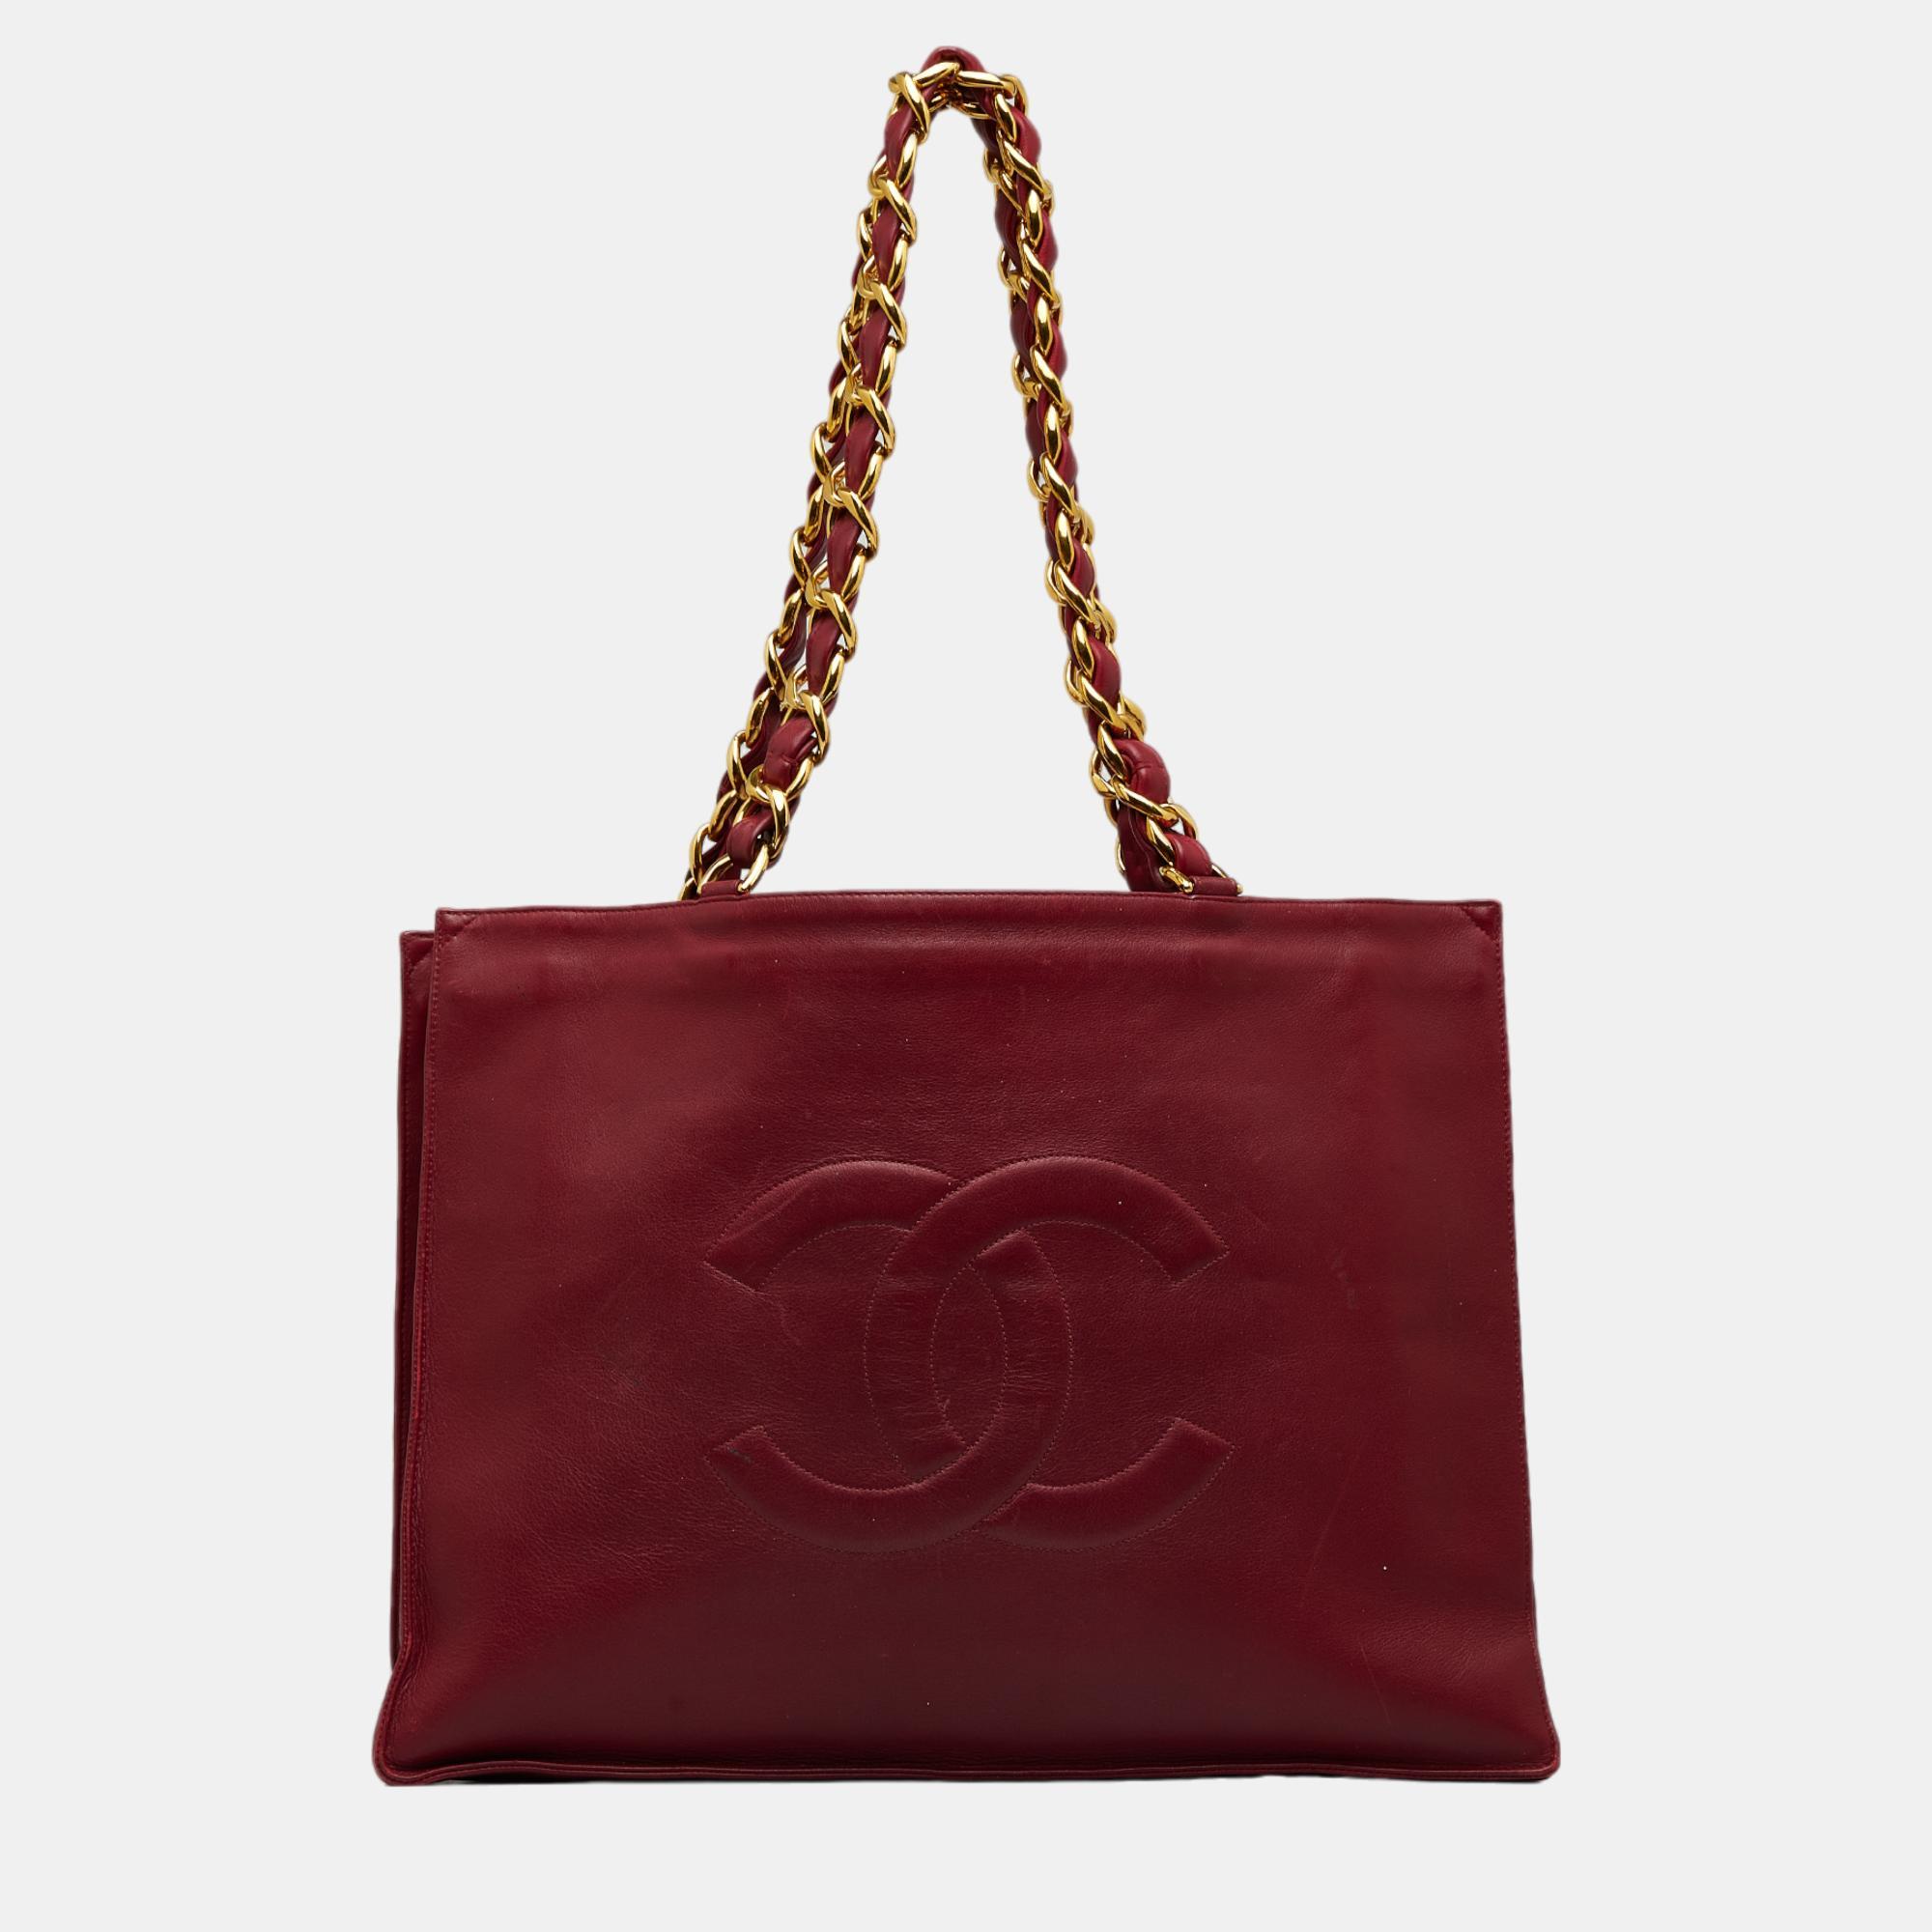 This tote bag features a lambskin leather body leather woven chain shoulder straps an open top and an interior zip pocket.